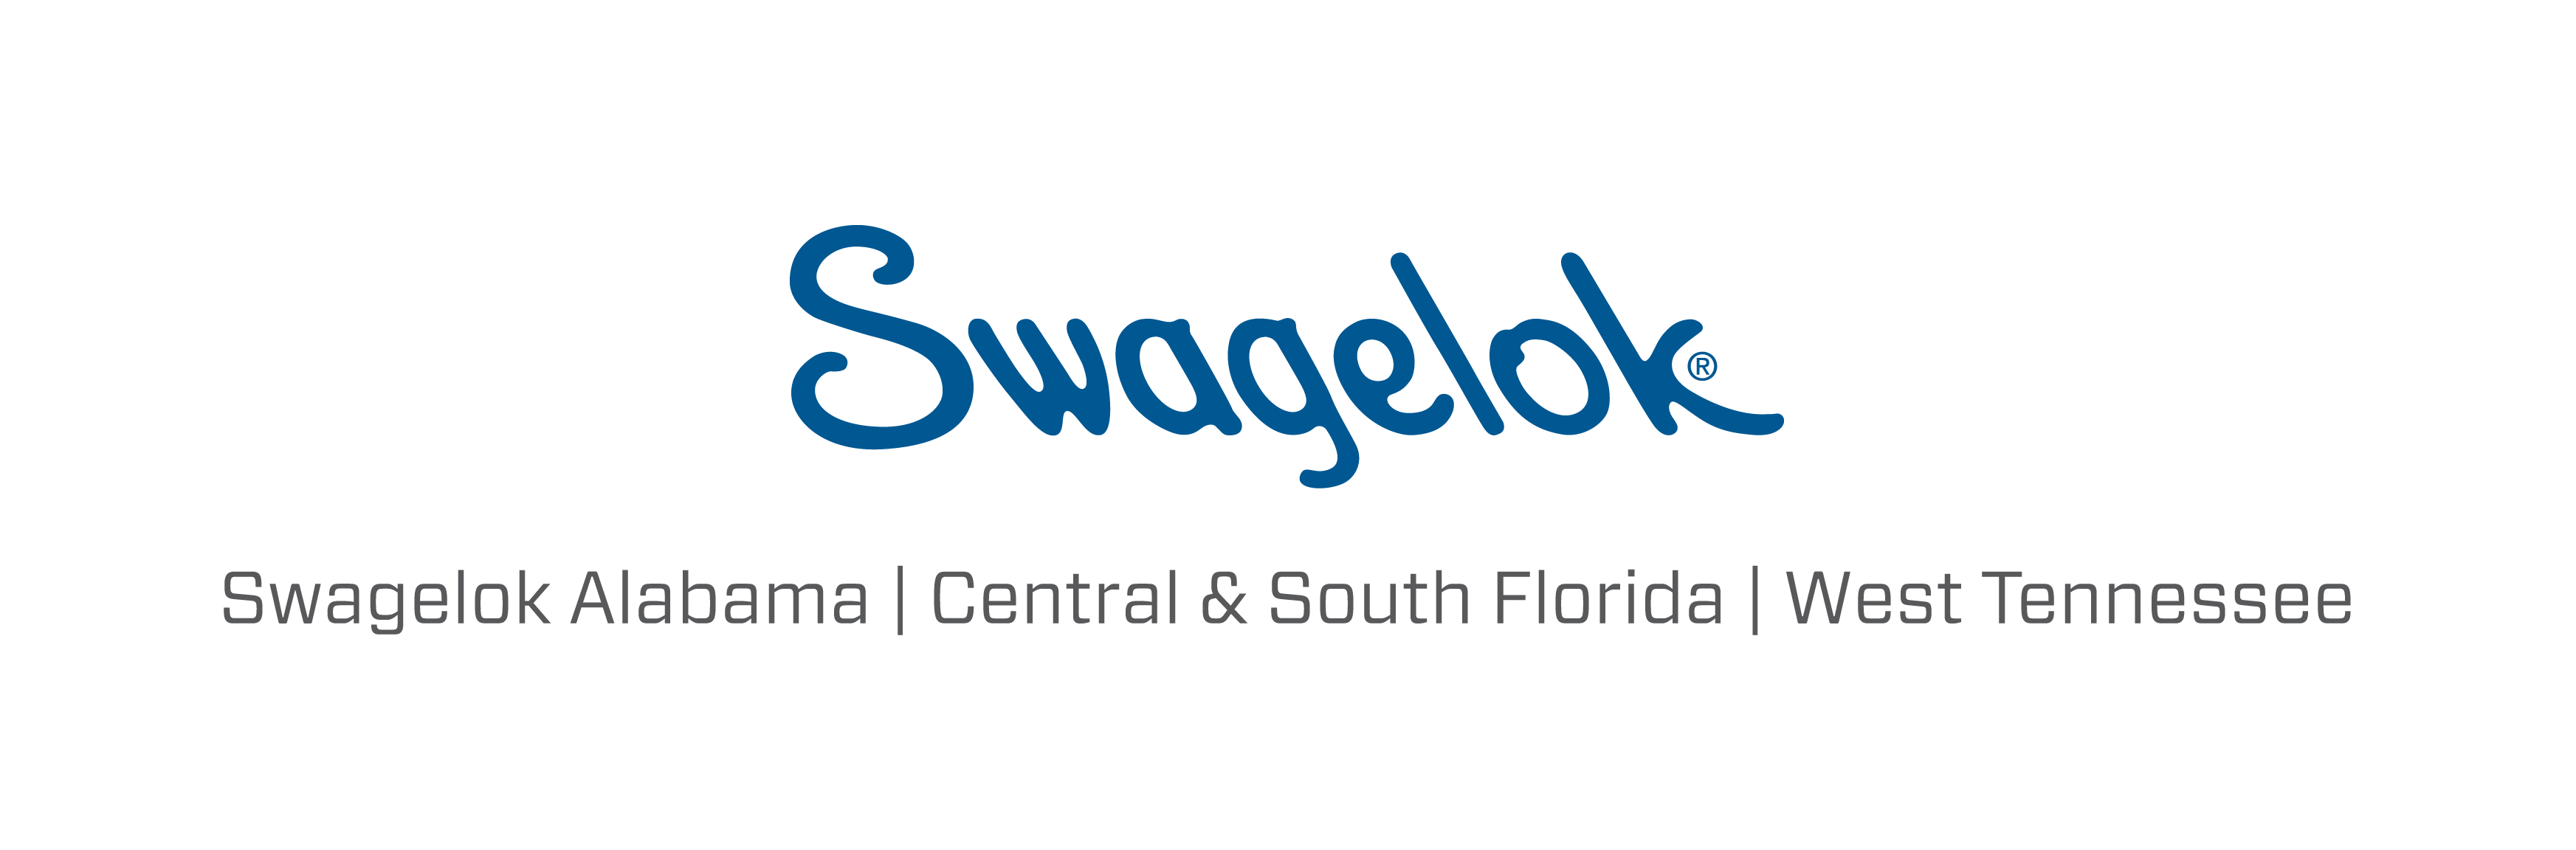 Swagelok Alabama | Central & South Florida | West Tennessee